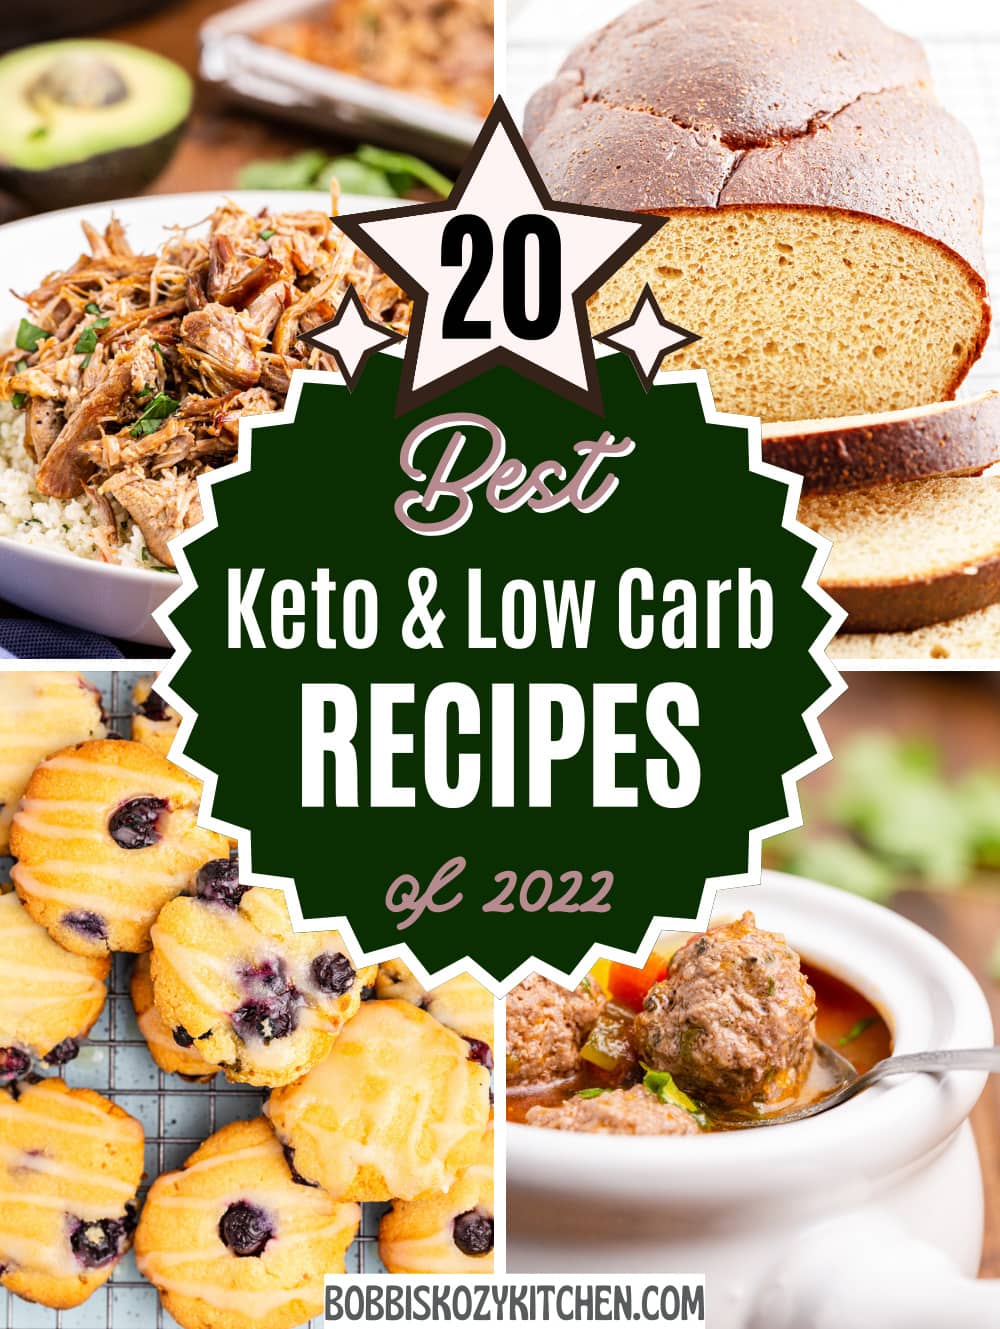 Photo collage of 4 images of the top keto recipes of 2022 on bobbiskozykitchen.com.